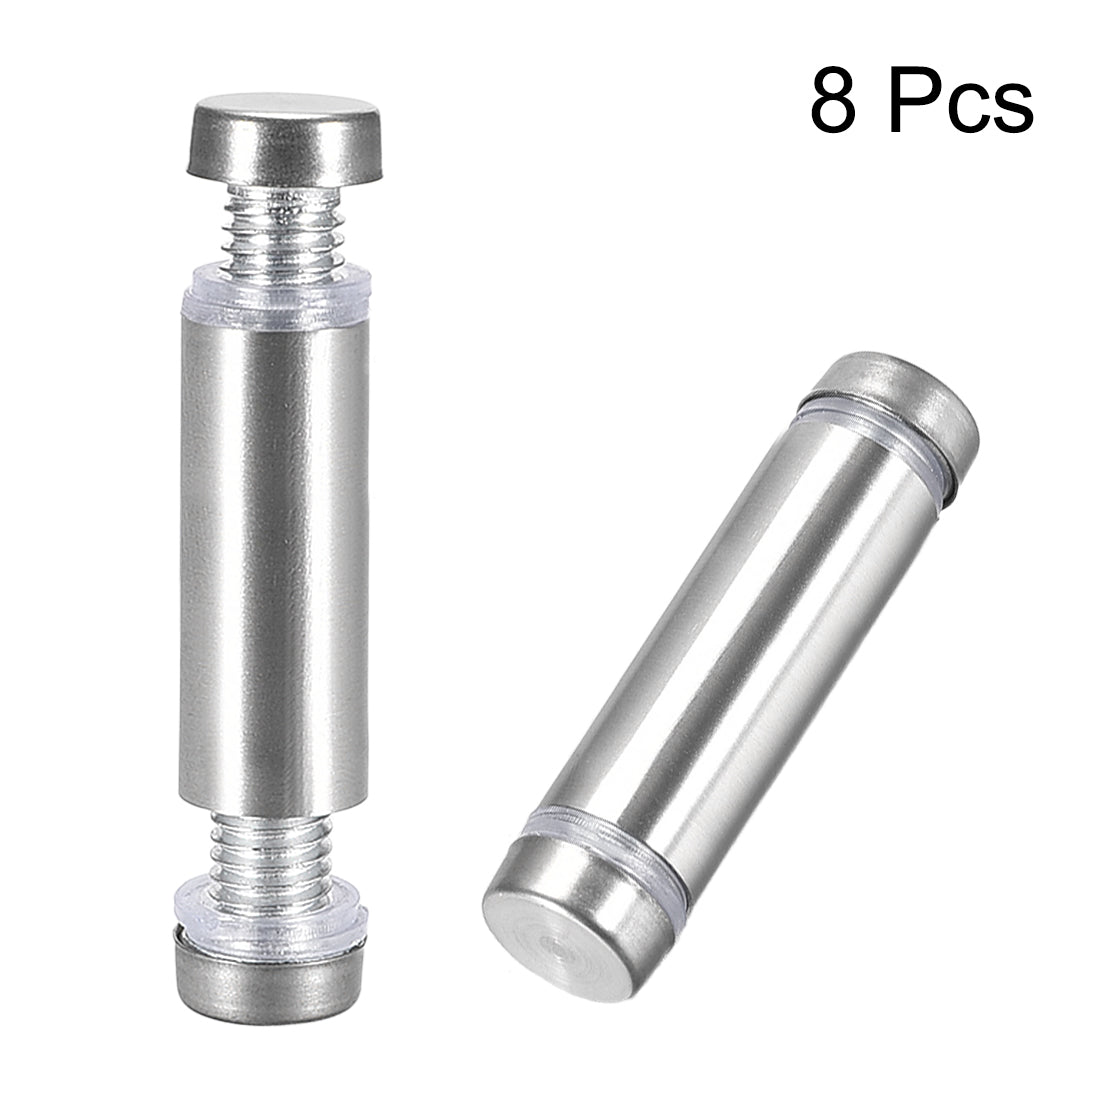 uxcell Uxcell Glass Standoff Double Head Stainless Steel Standoff Holder 12mm x 44mm 8 Pcs